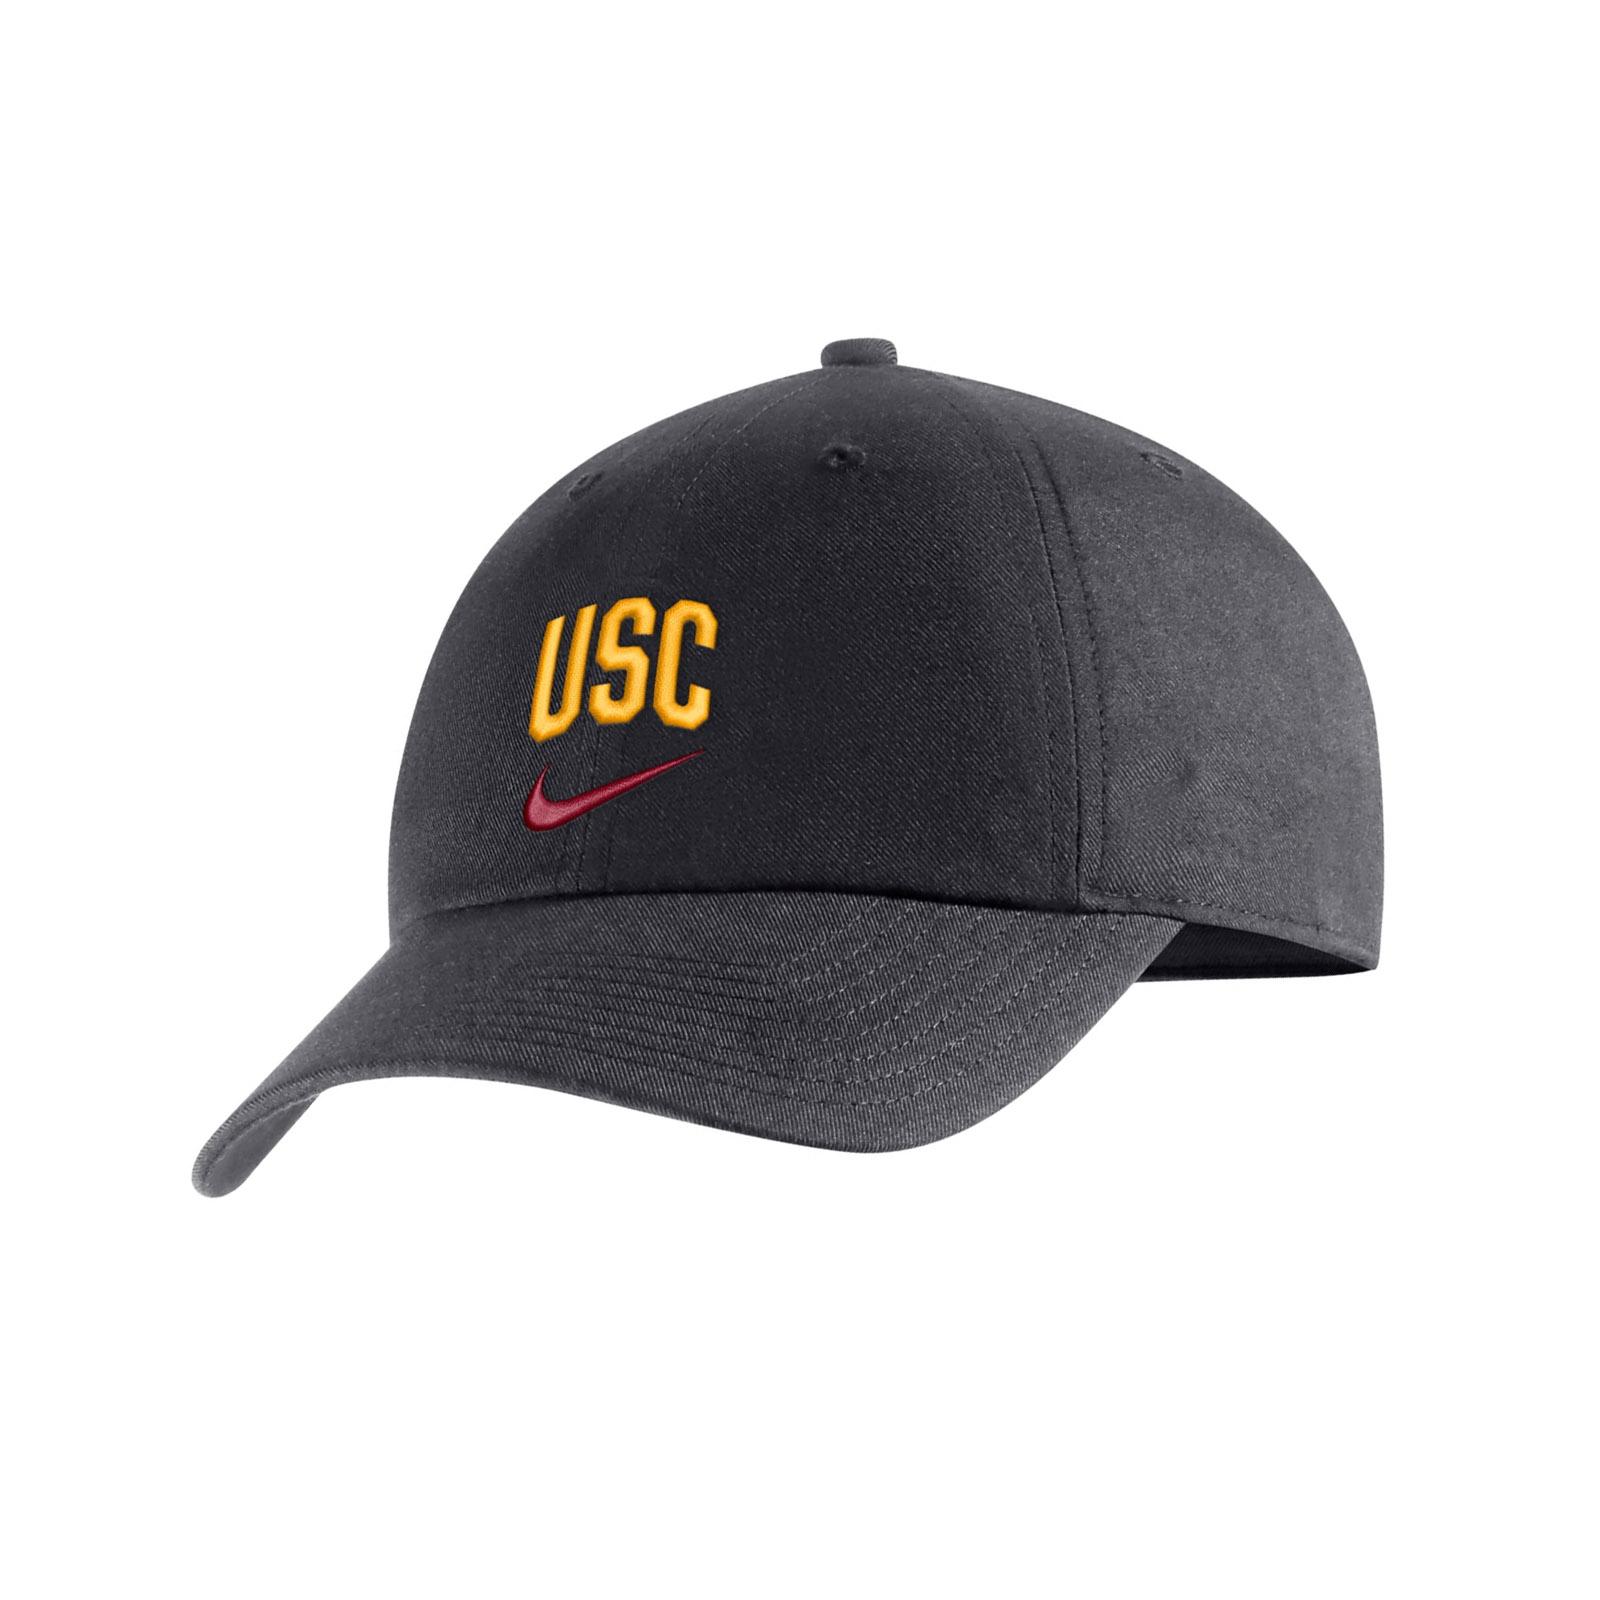 USC Arch H86 Adjustable Hat Anthracite by BCS Nike image01